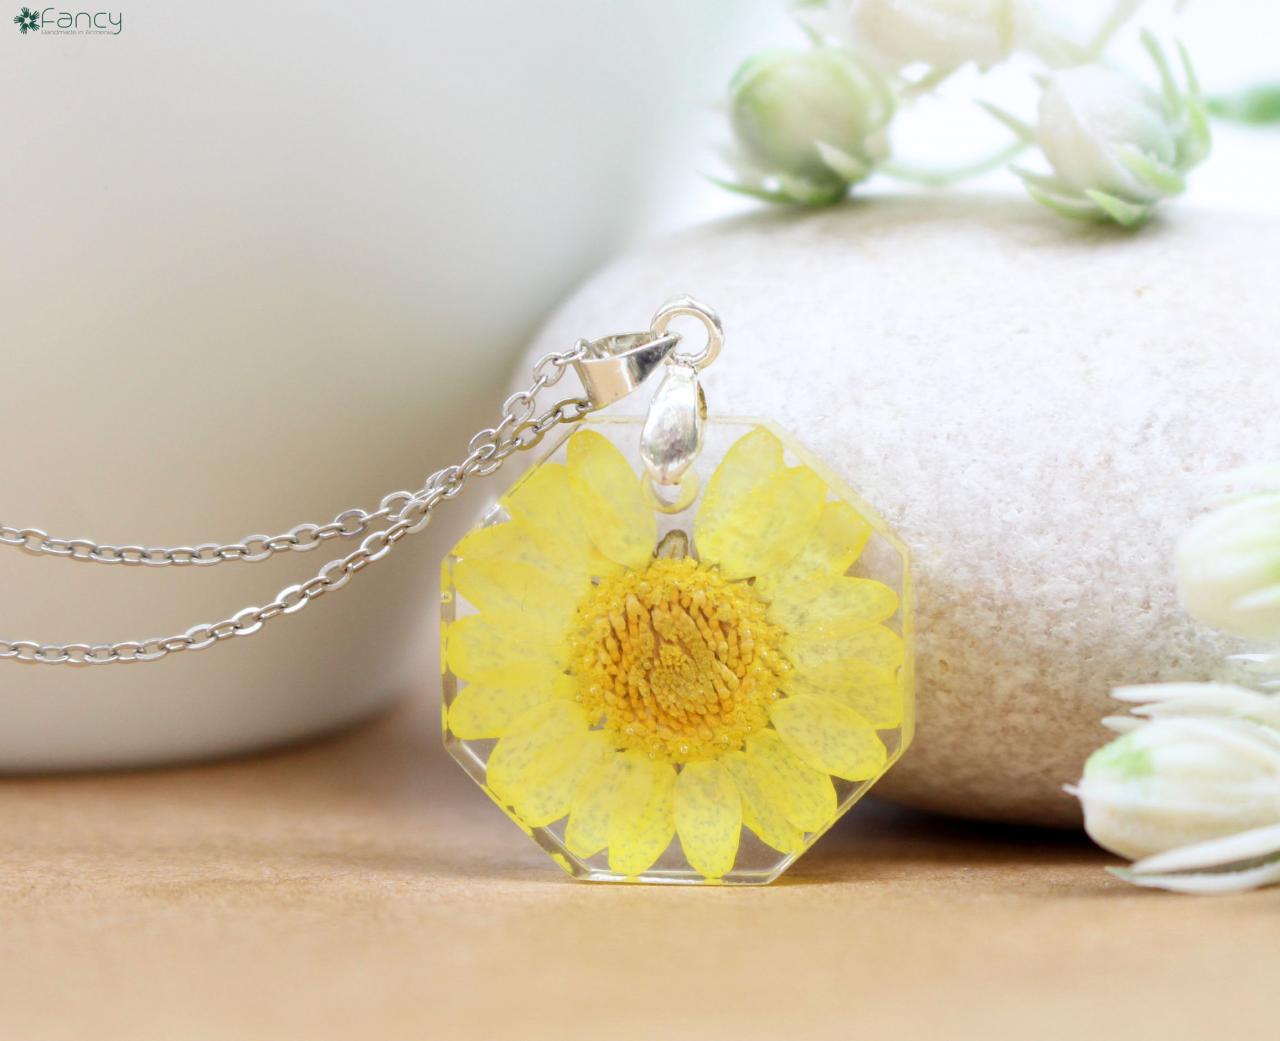 Real Sunflower Necklace, Black Eyed Susan Jewelry, Dried Sunflowers, Dry Sunflower Necklace, Pressed Flower Jewelry Gift Armenian